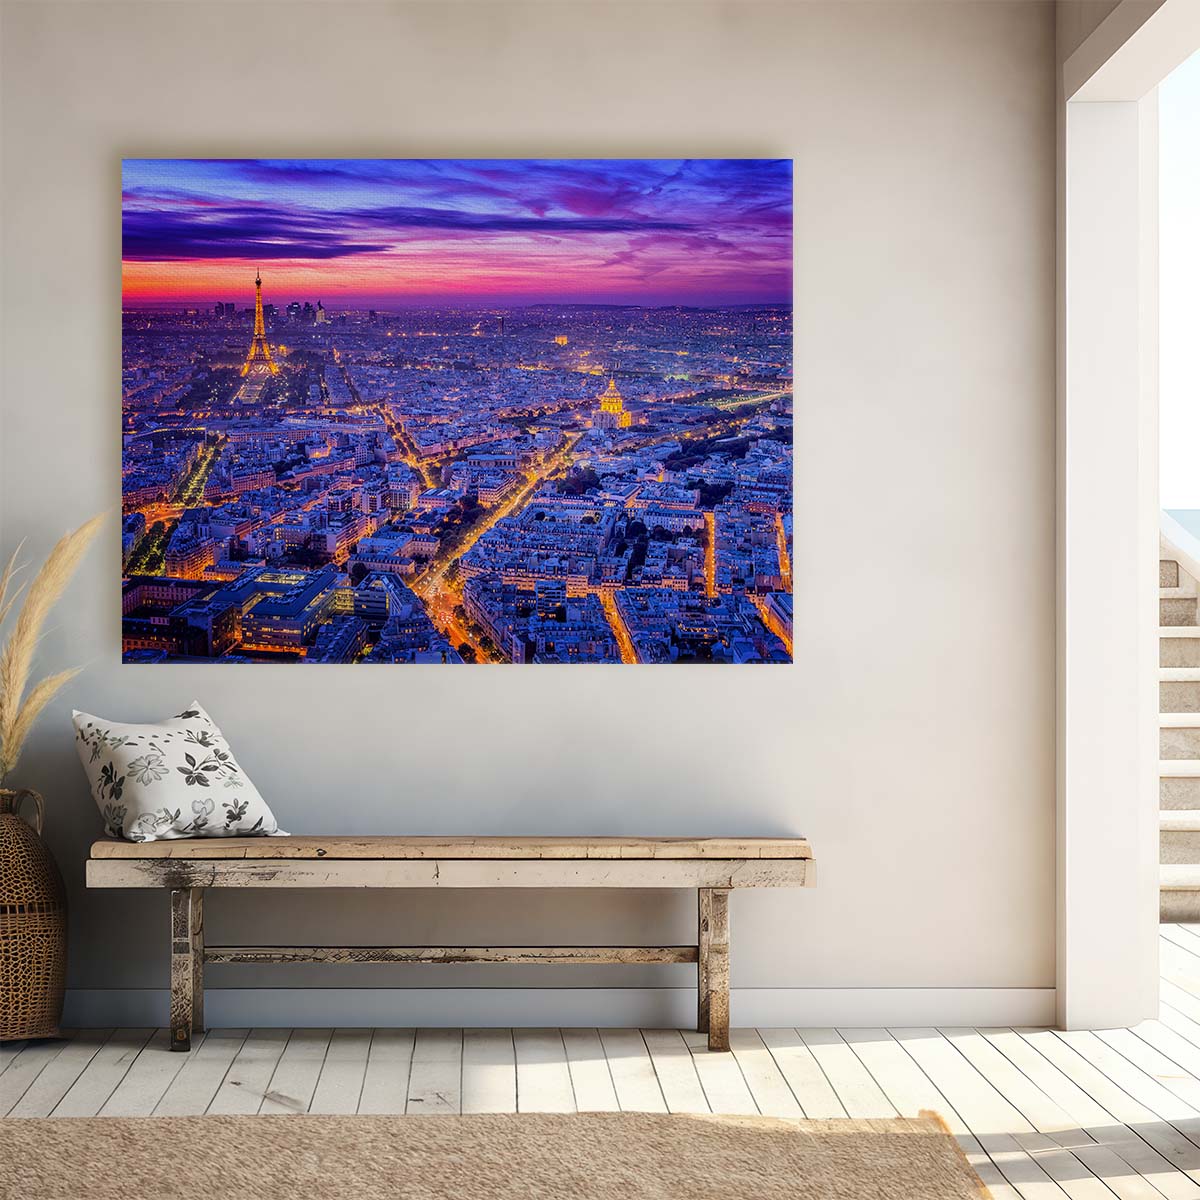 Paris Skyline at Twilight Eiffel Tower Wall Art by Luxuriance Designs. Made in USA.